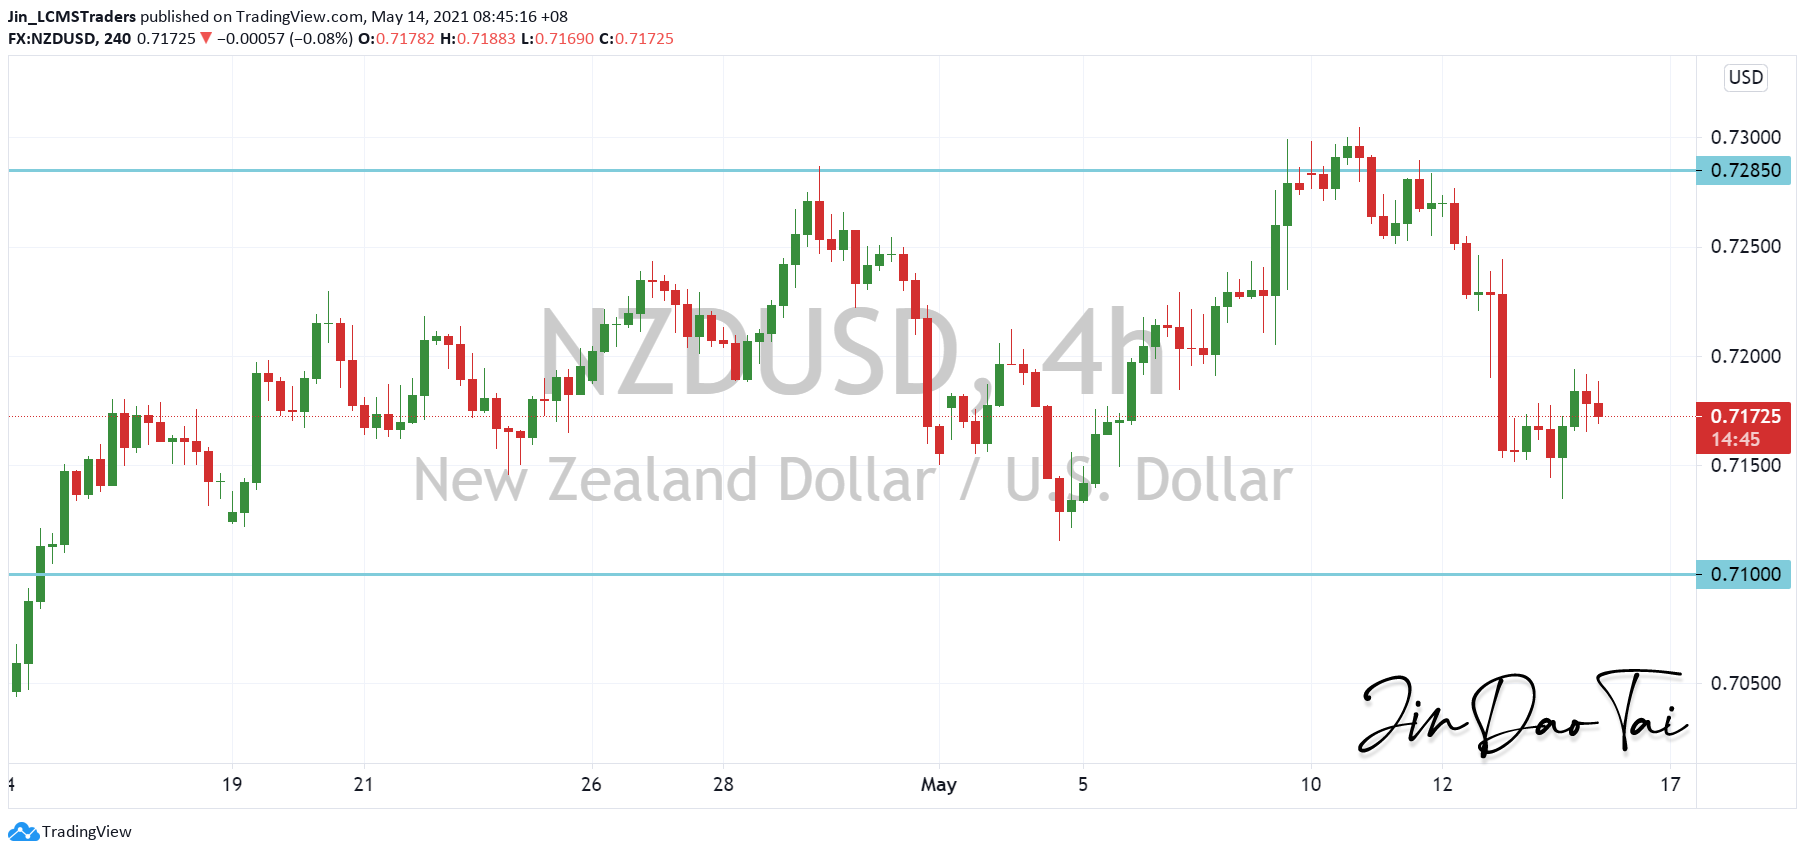 NZD/USD Outlook (14 May 2021)